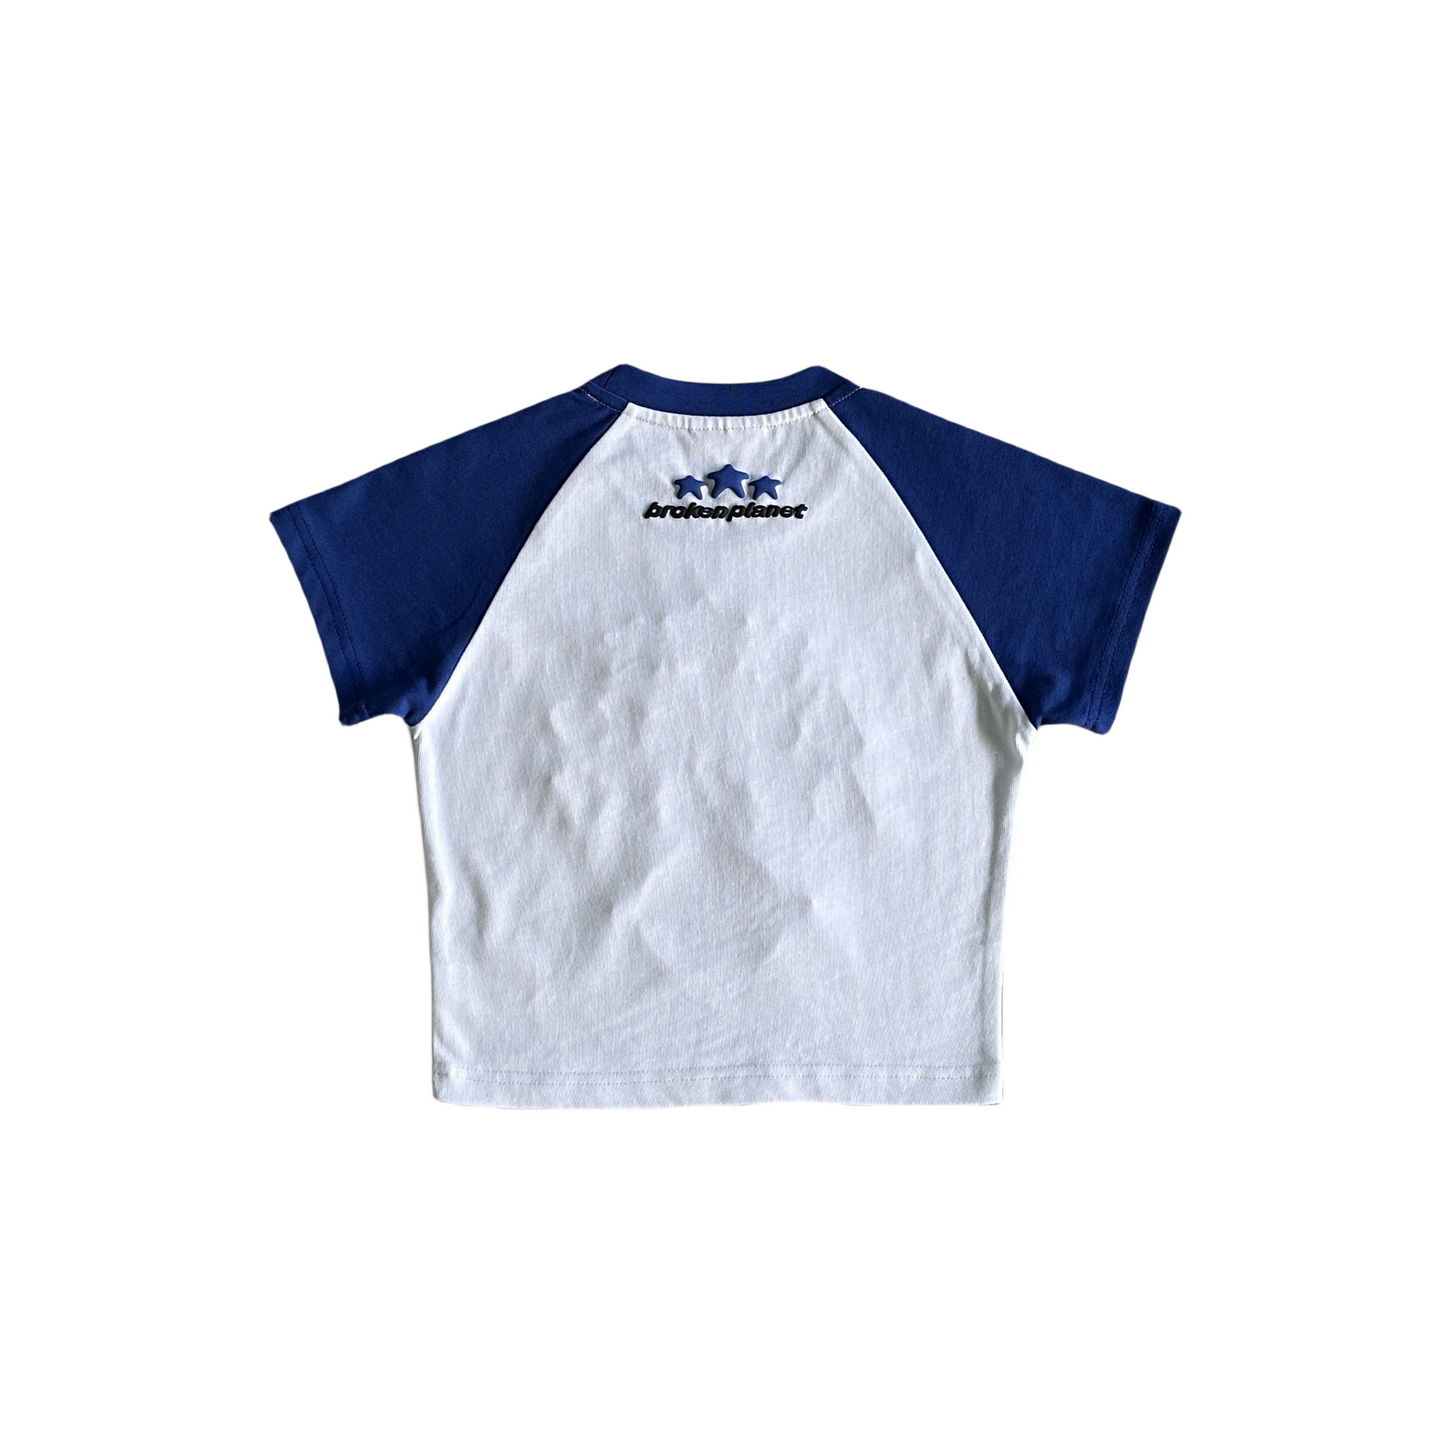 Broken Planet 'born to be fast' Baby Tee Casual Streetwear Short Sleeve T-shirt- White/Blue